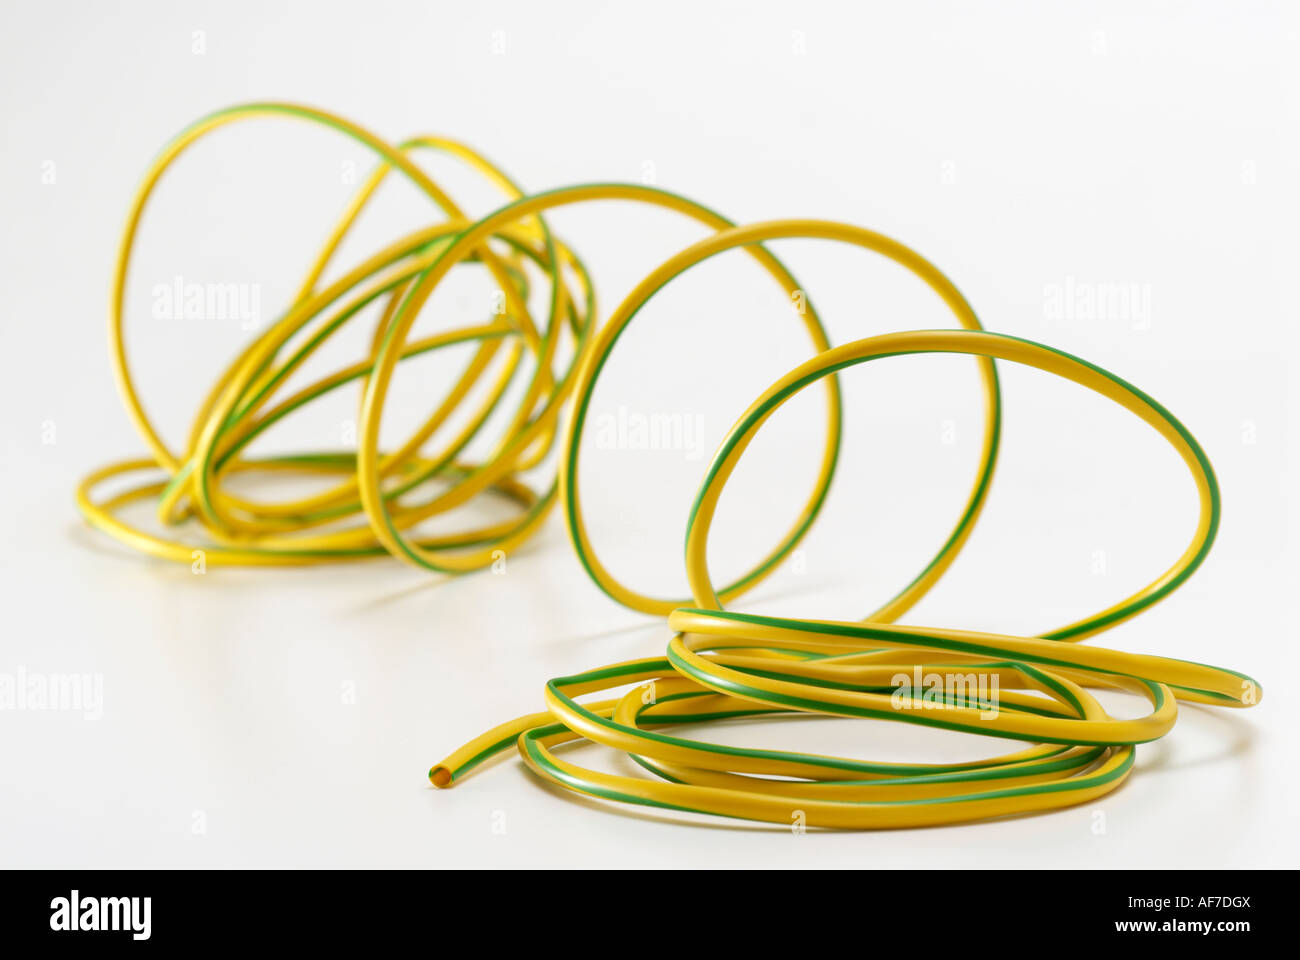 Plastic Yellow and Green domestic electricity' earthing cable' sleeving Stock Photo